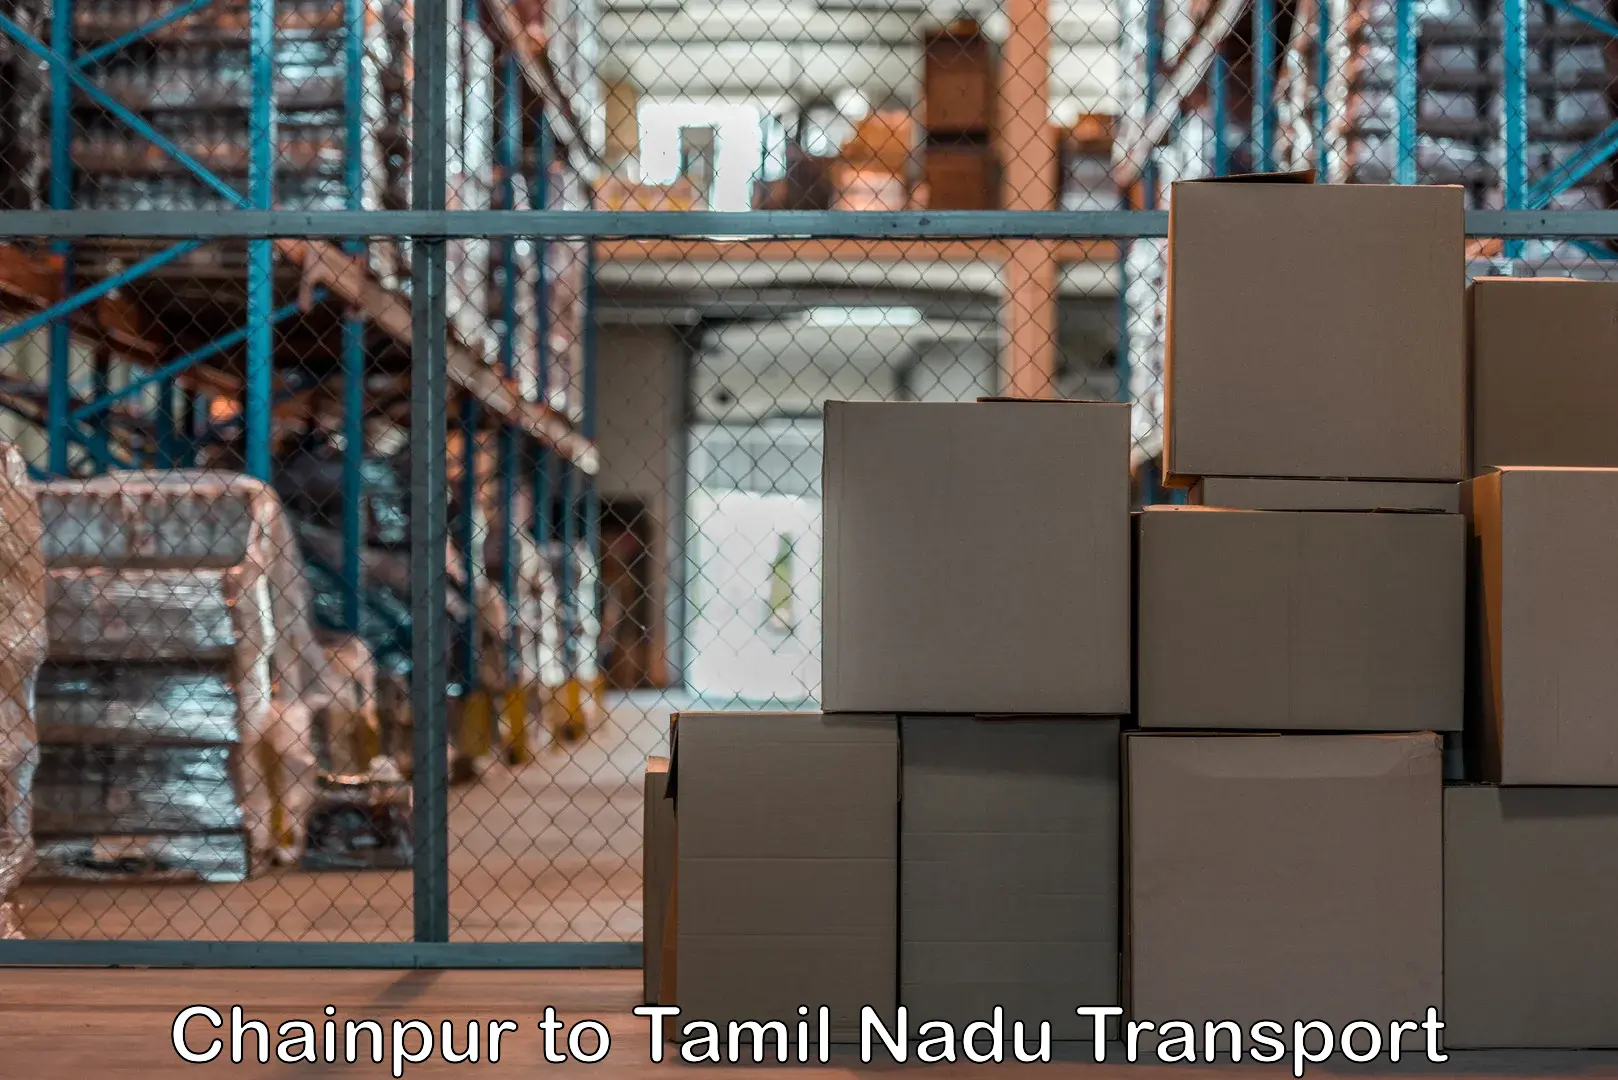 Transport shared services Chainpur to Ennore Port Chennai